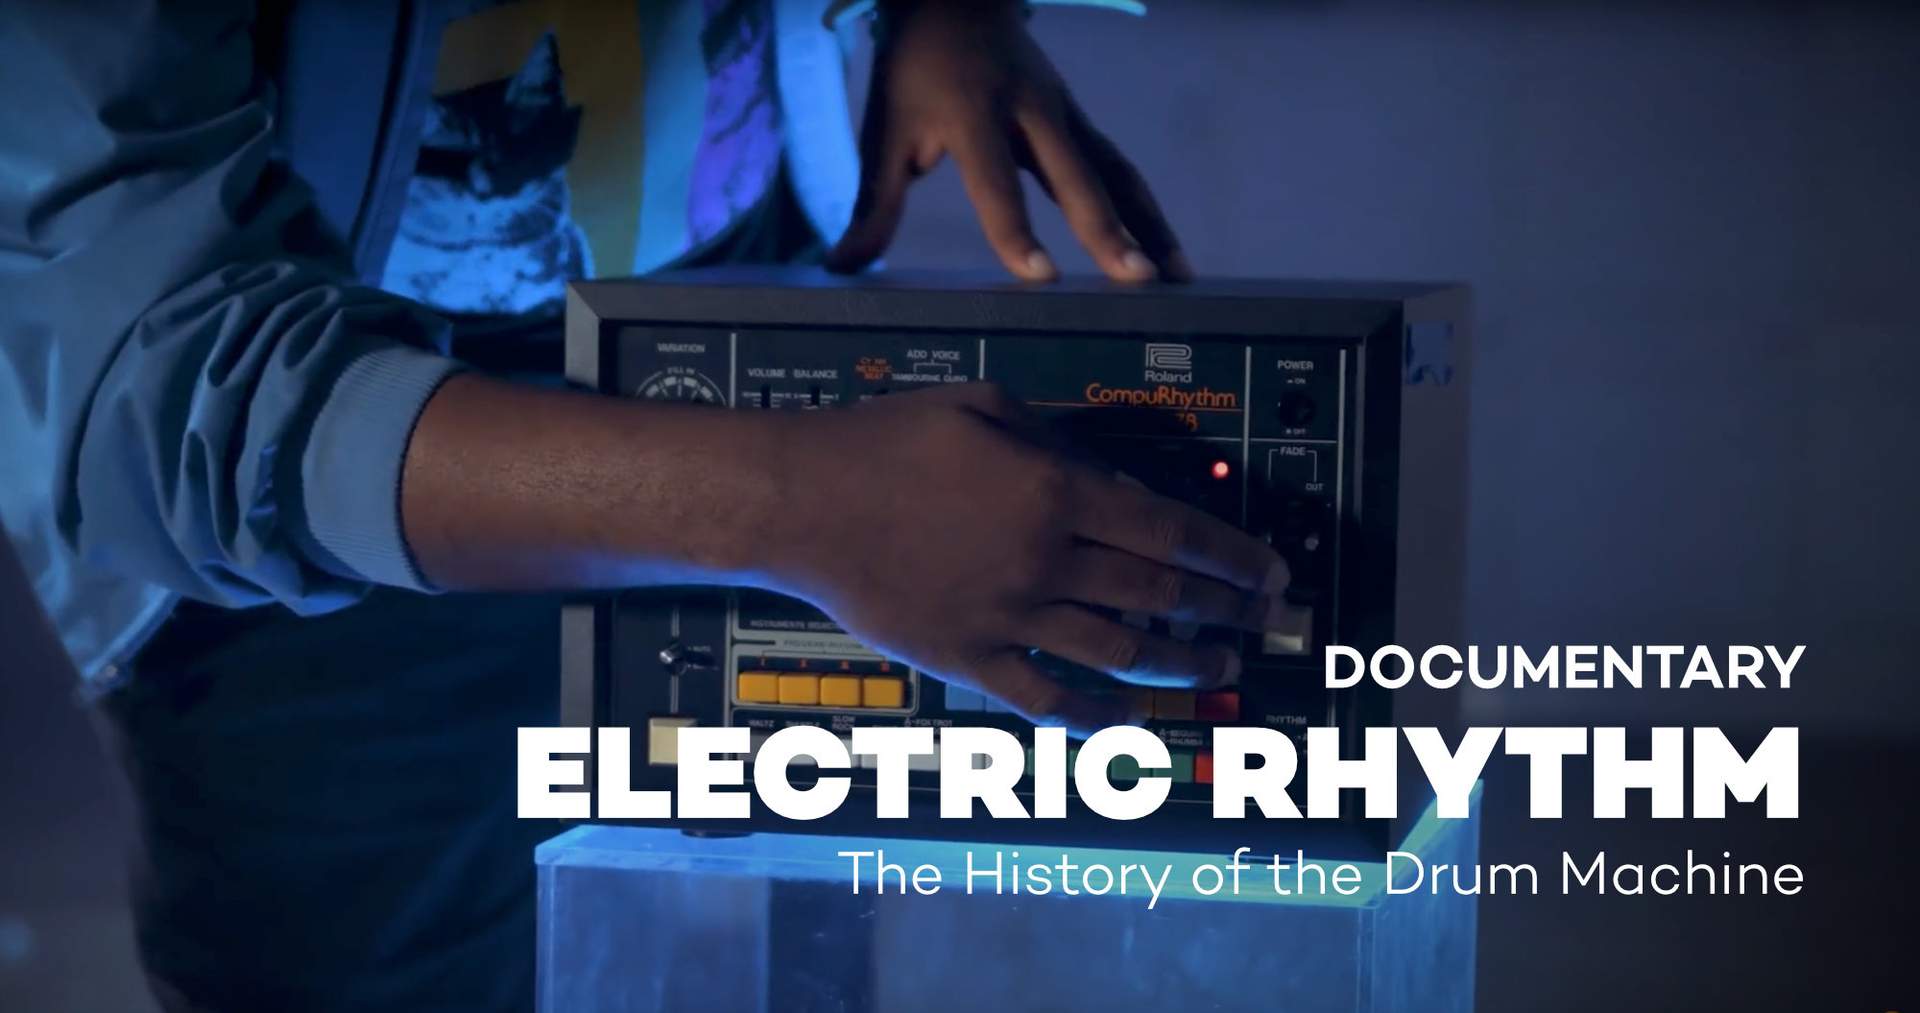 The History of the Drum Machine